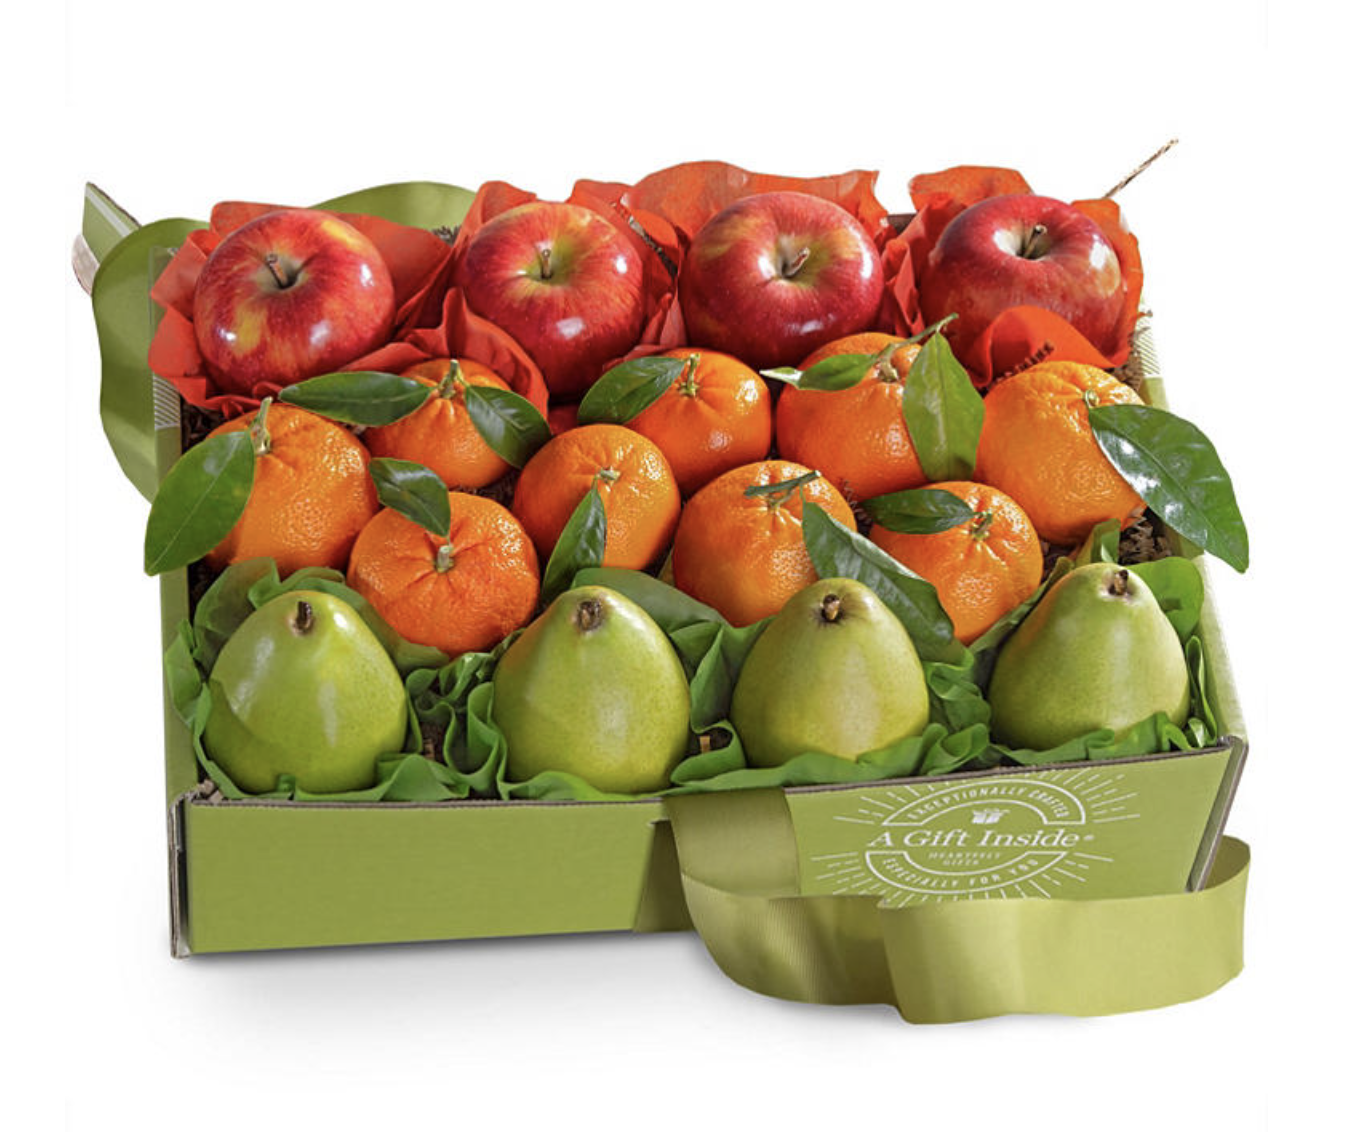 Apples, oranges, and pears in box